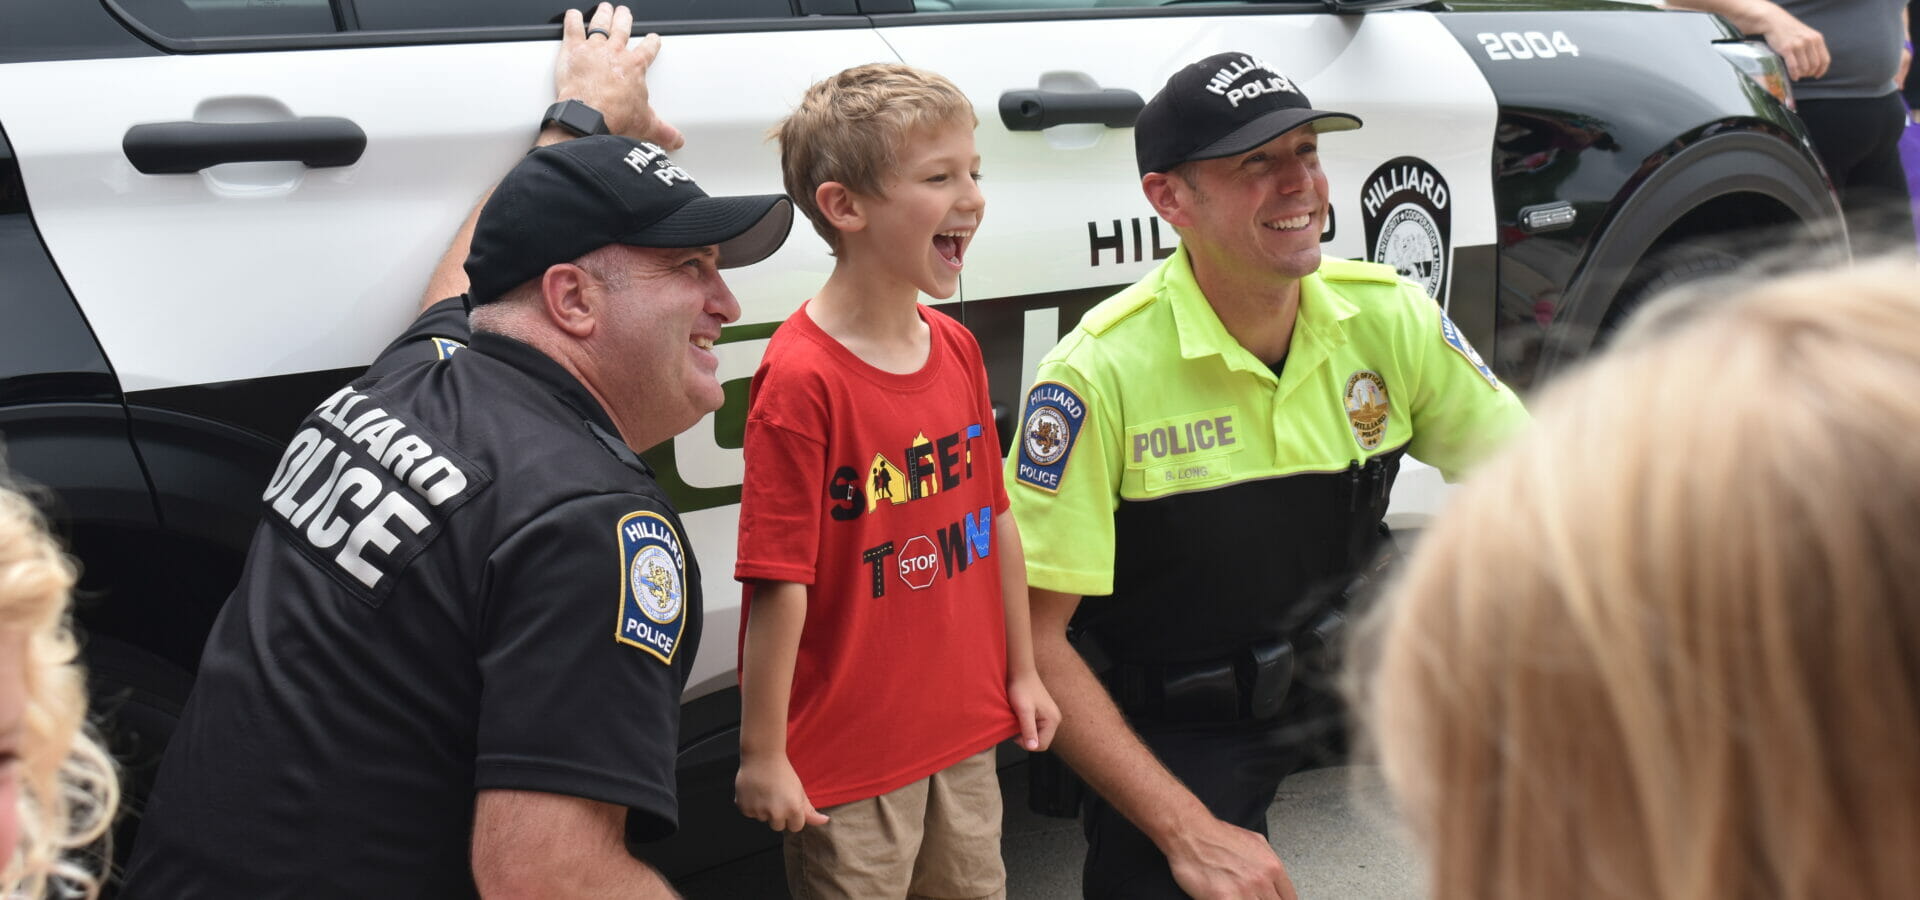 Officers posing with kid